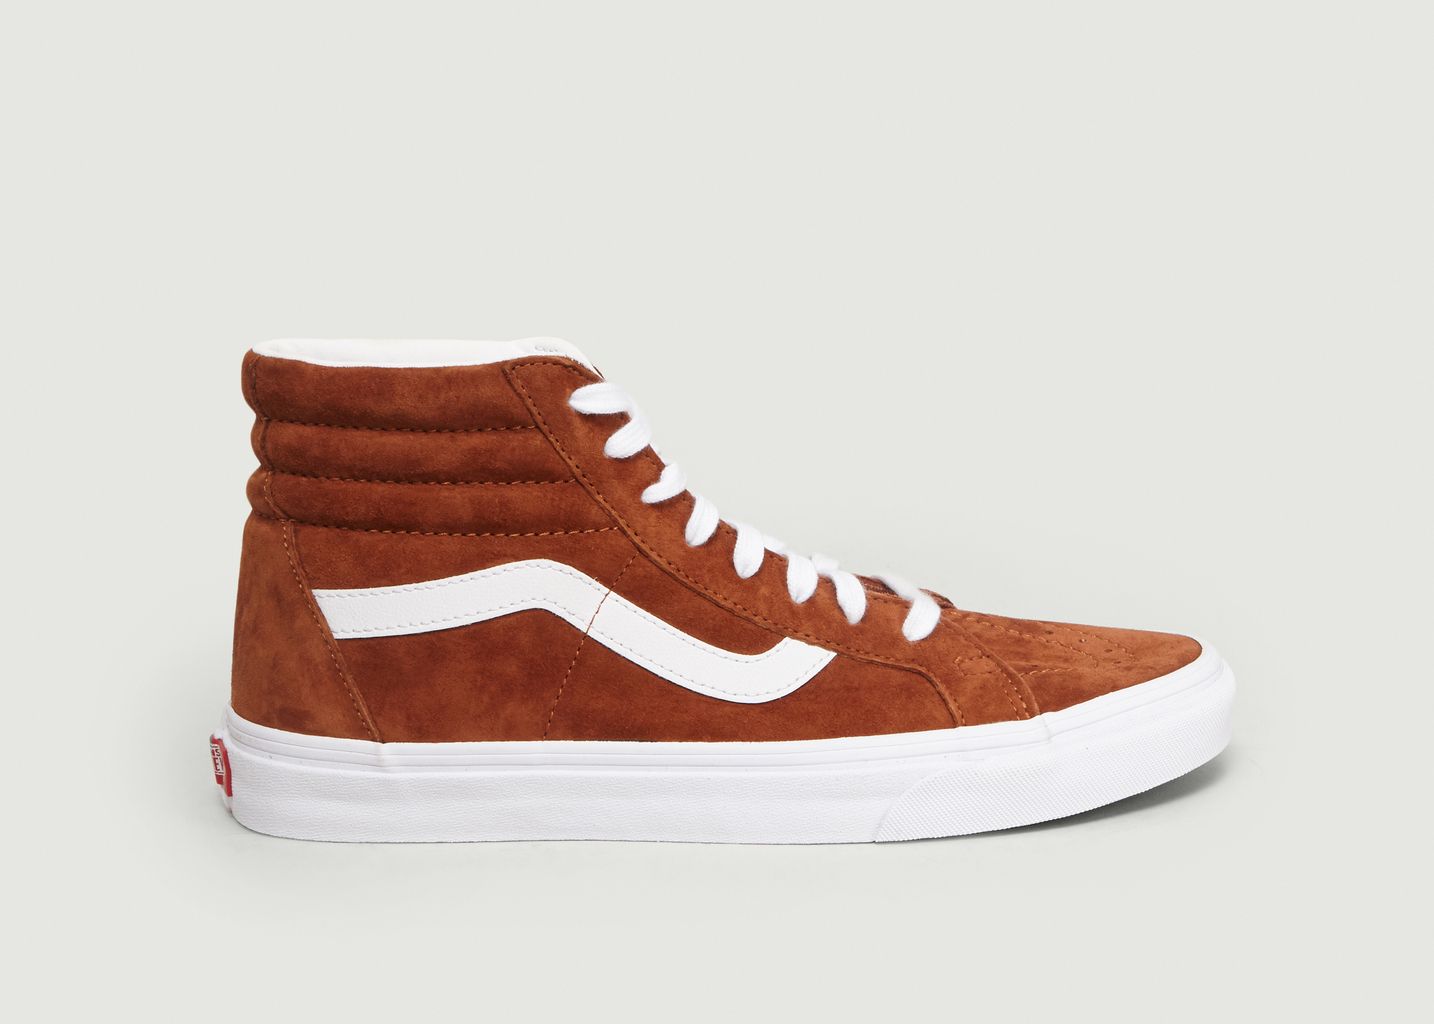 SK8-HI Re-issue Sued